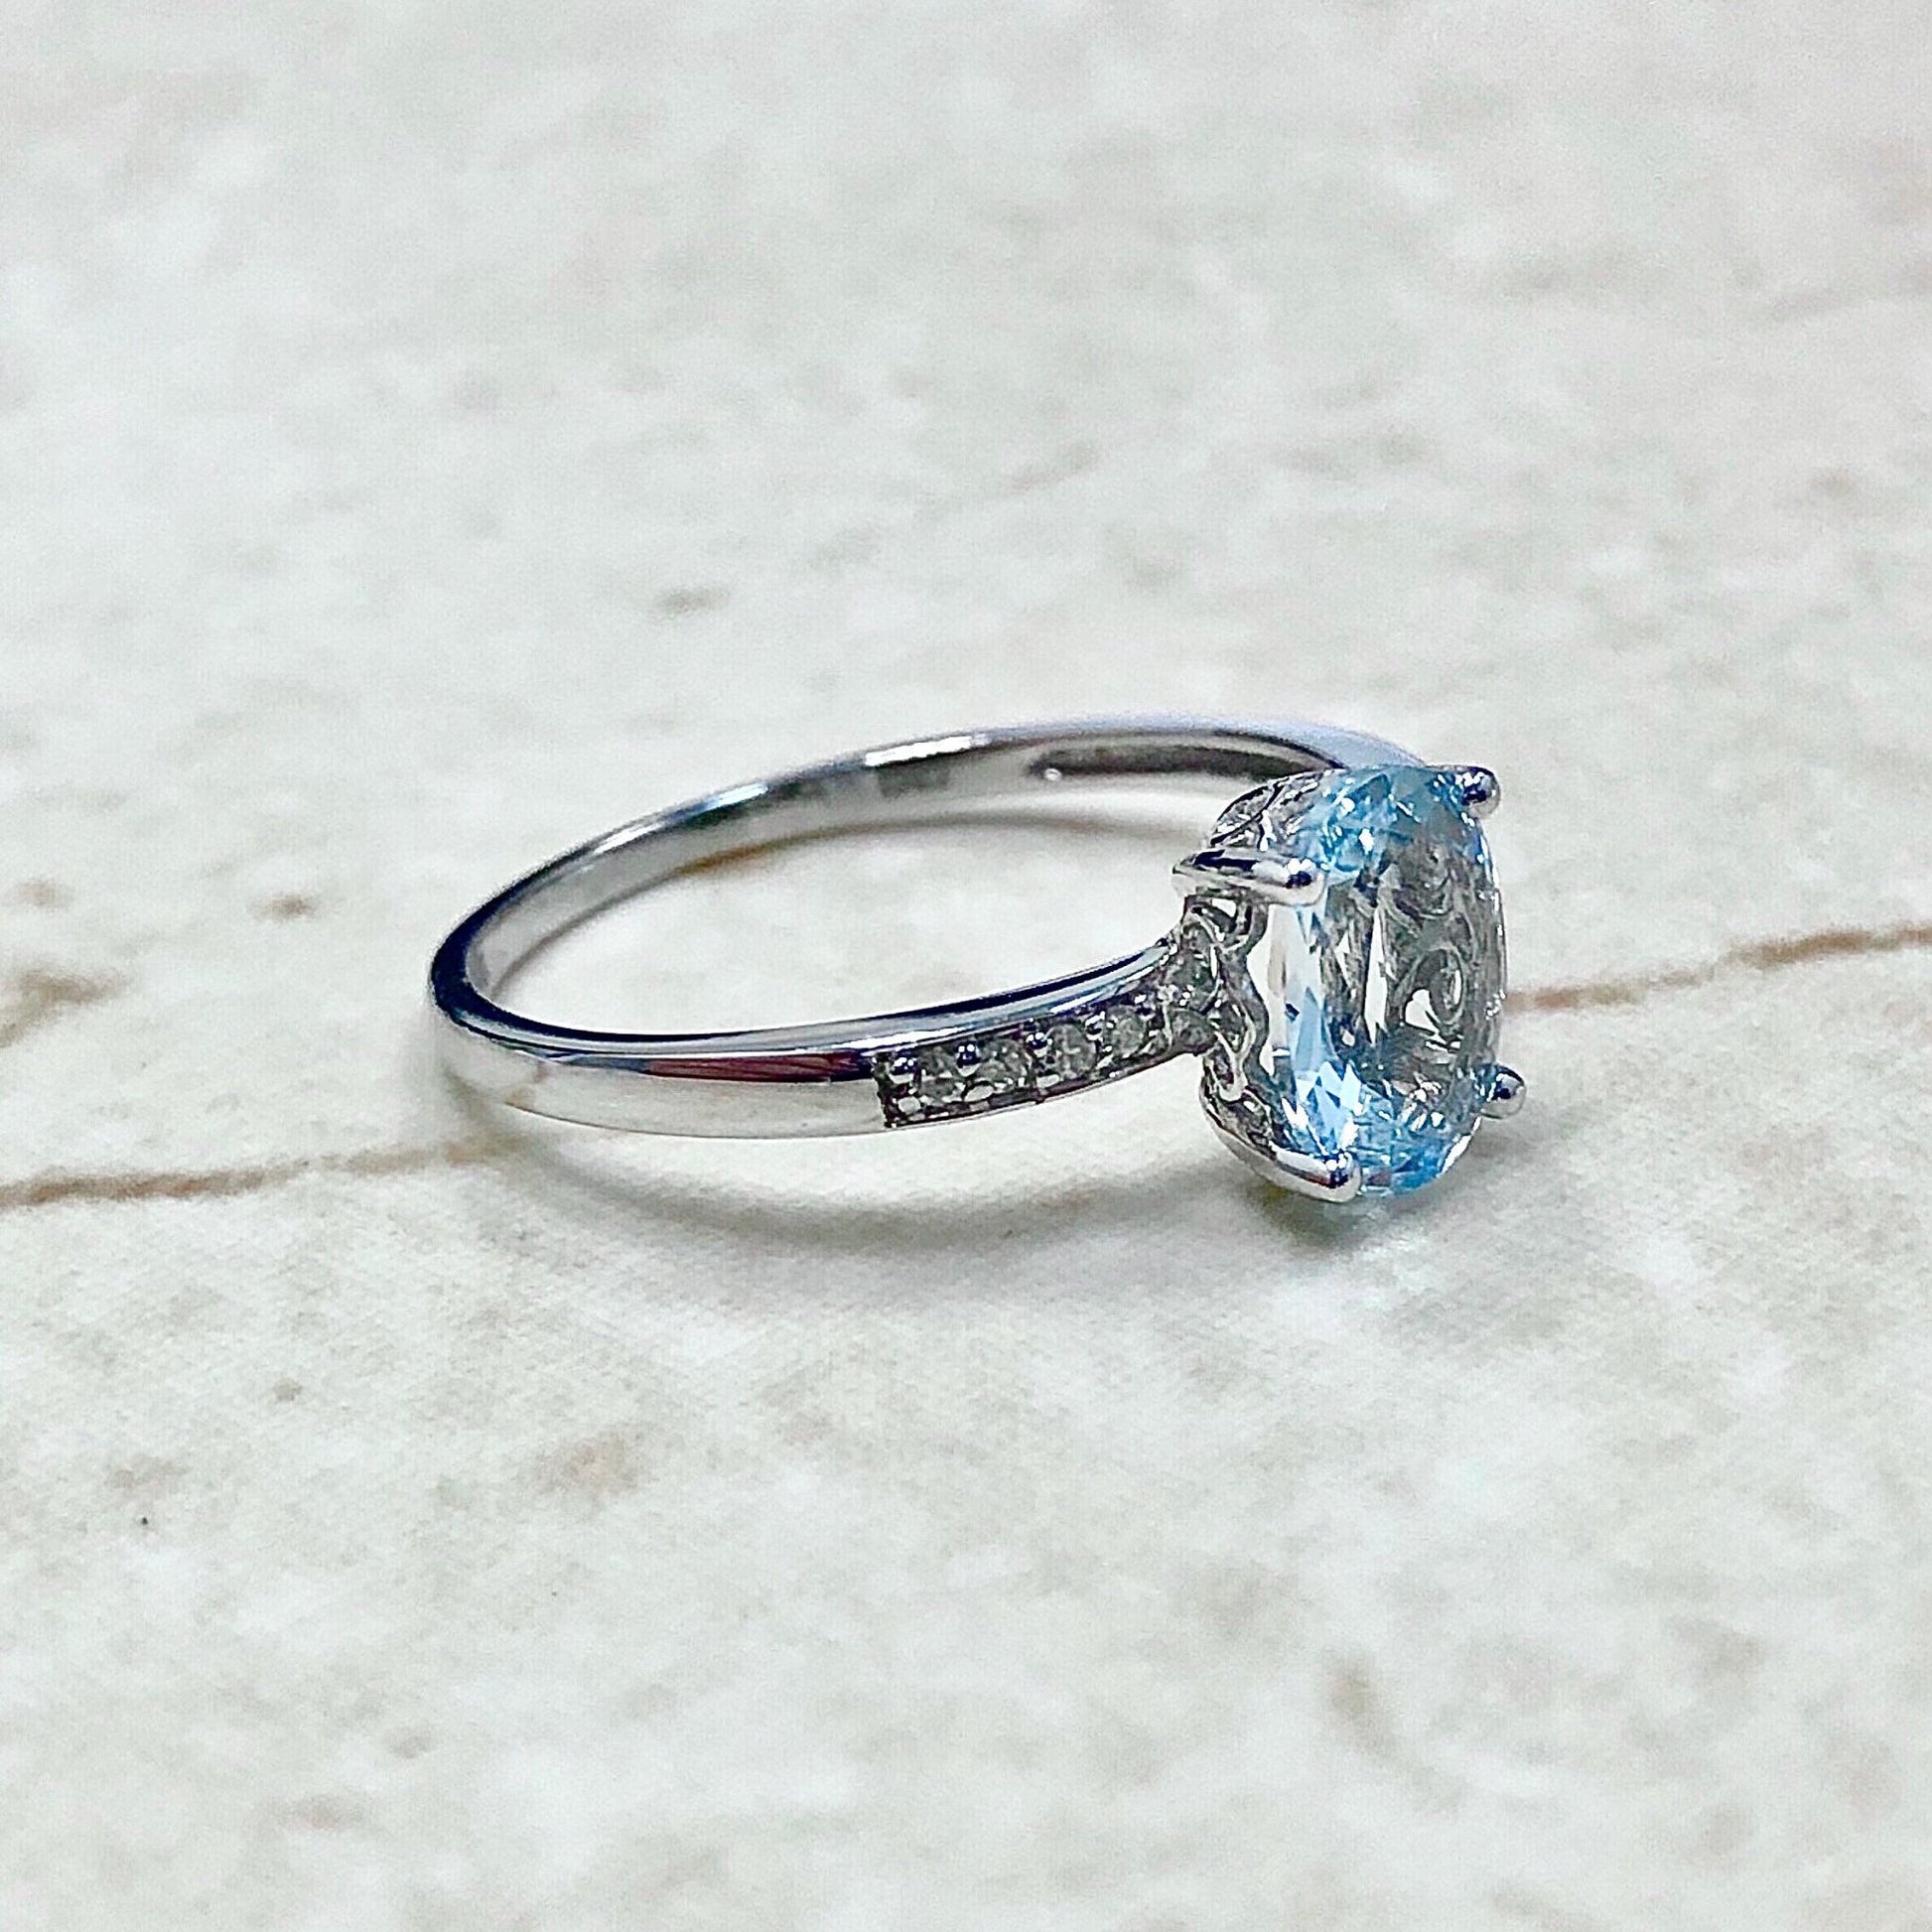 14K Oval Aquamarine & Diamond Ring  - White Gold Aquamarine Solitaire Ring - March Birthstone - Birthday Gift - Best Gift For Her